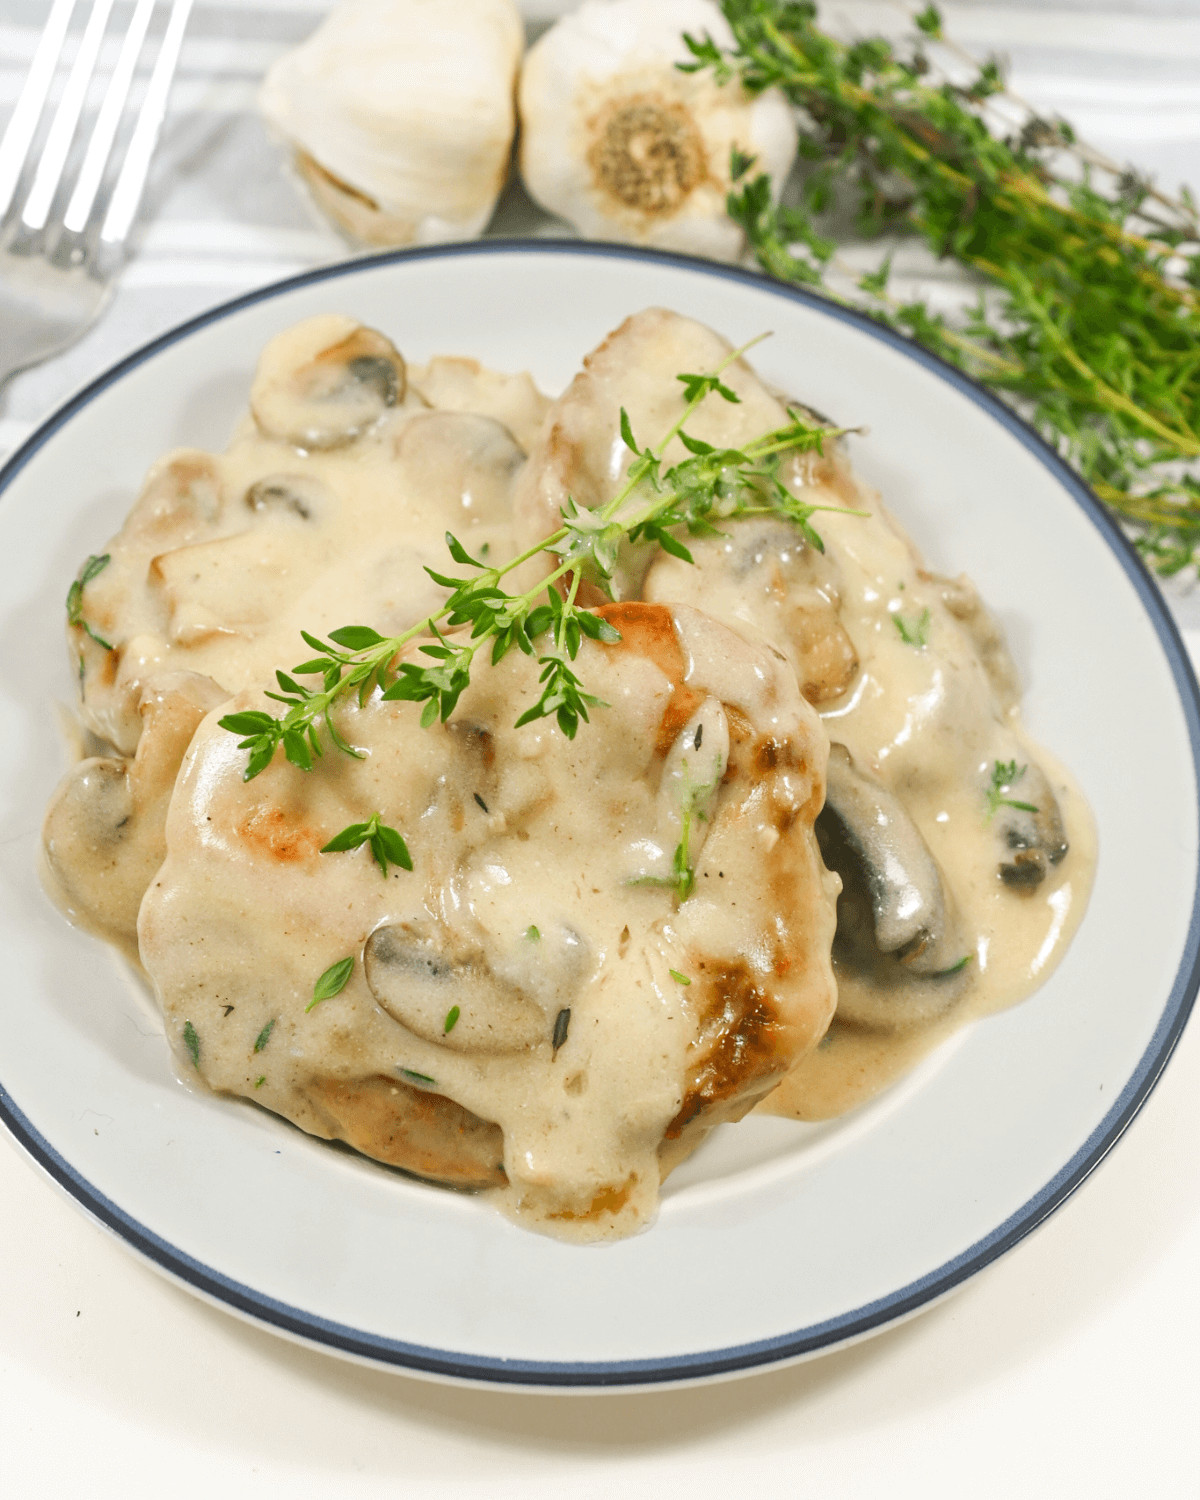 Pork chops with a creamy mushroom sauce garnished with fresh herbs served on a plate.